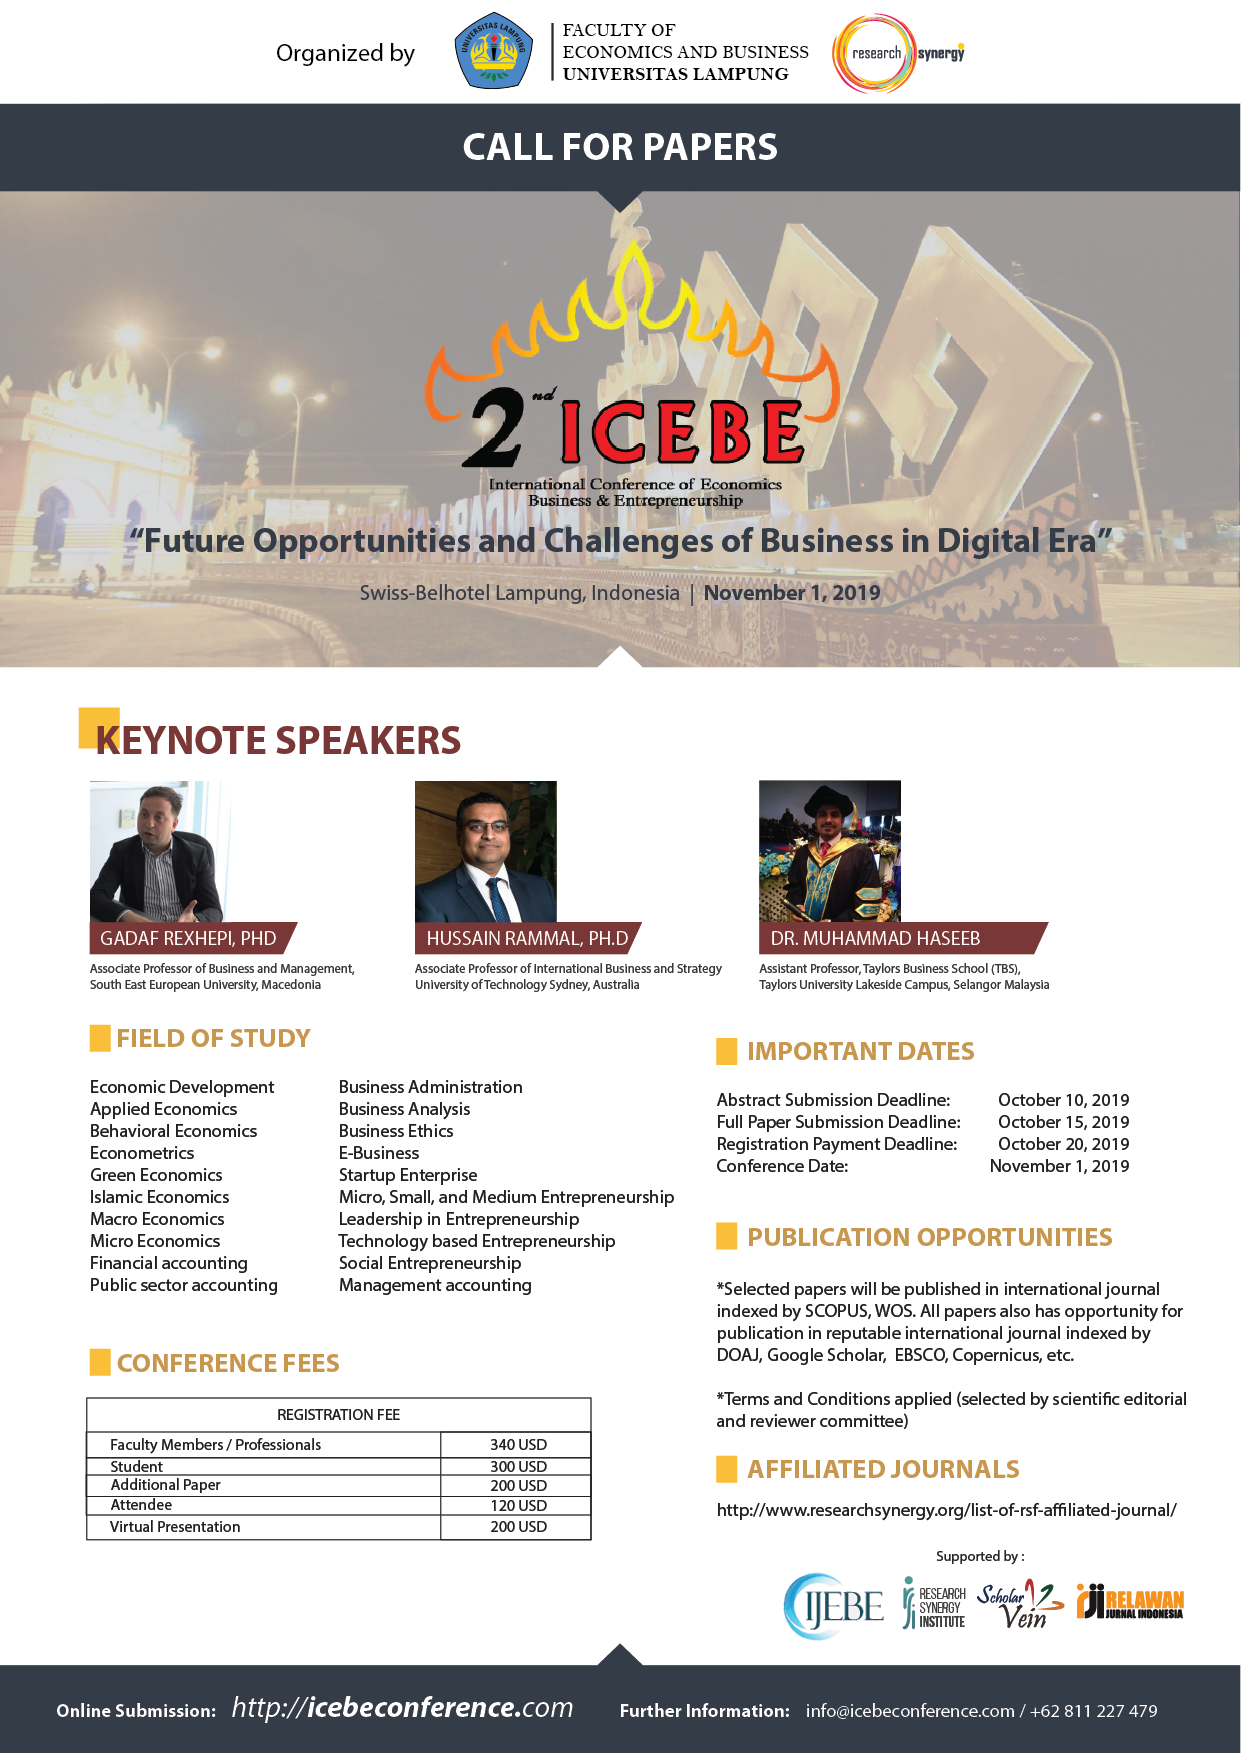 The 2nd International Conference of Economics, Business and Entrepreneurship (2nd ICEBE)